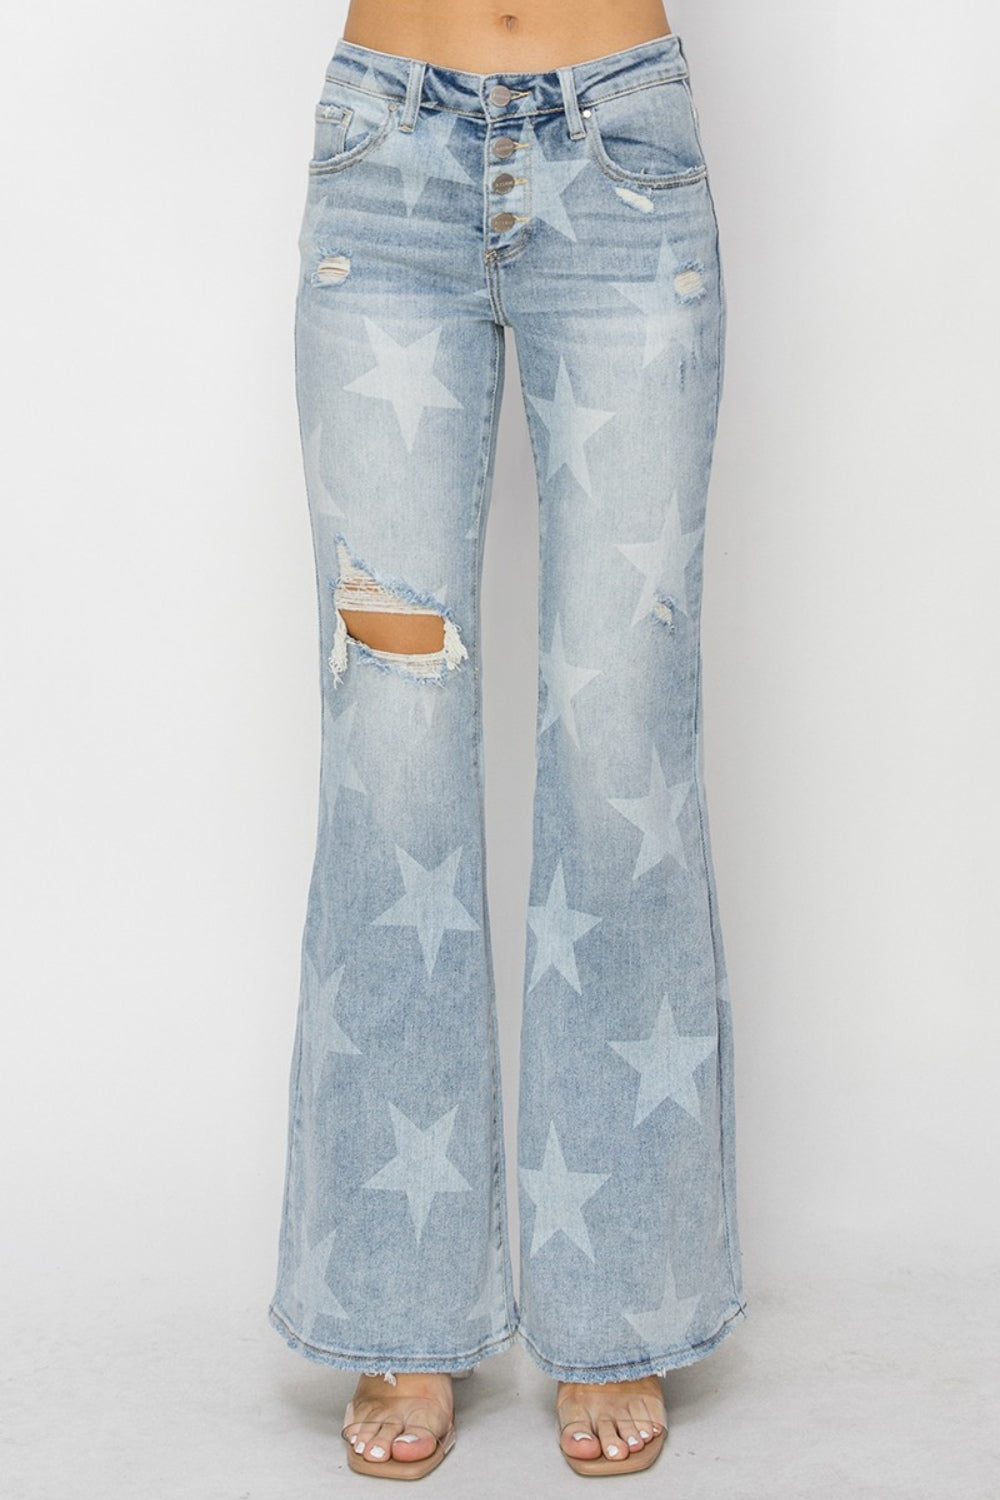 Starry Skies Mid Rise Button Fly RISEN Flare Jeans